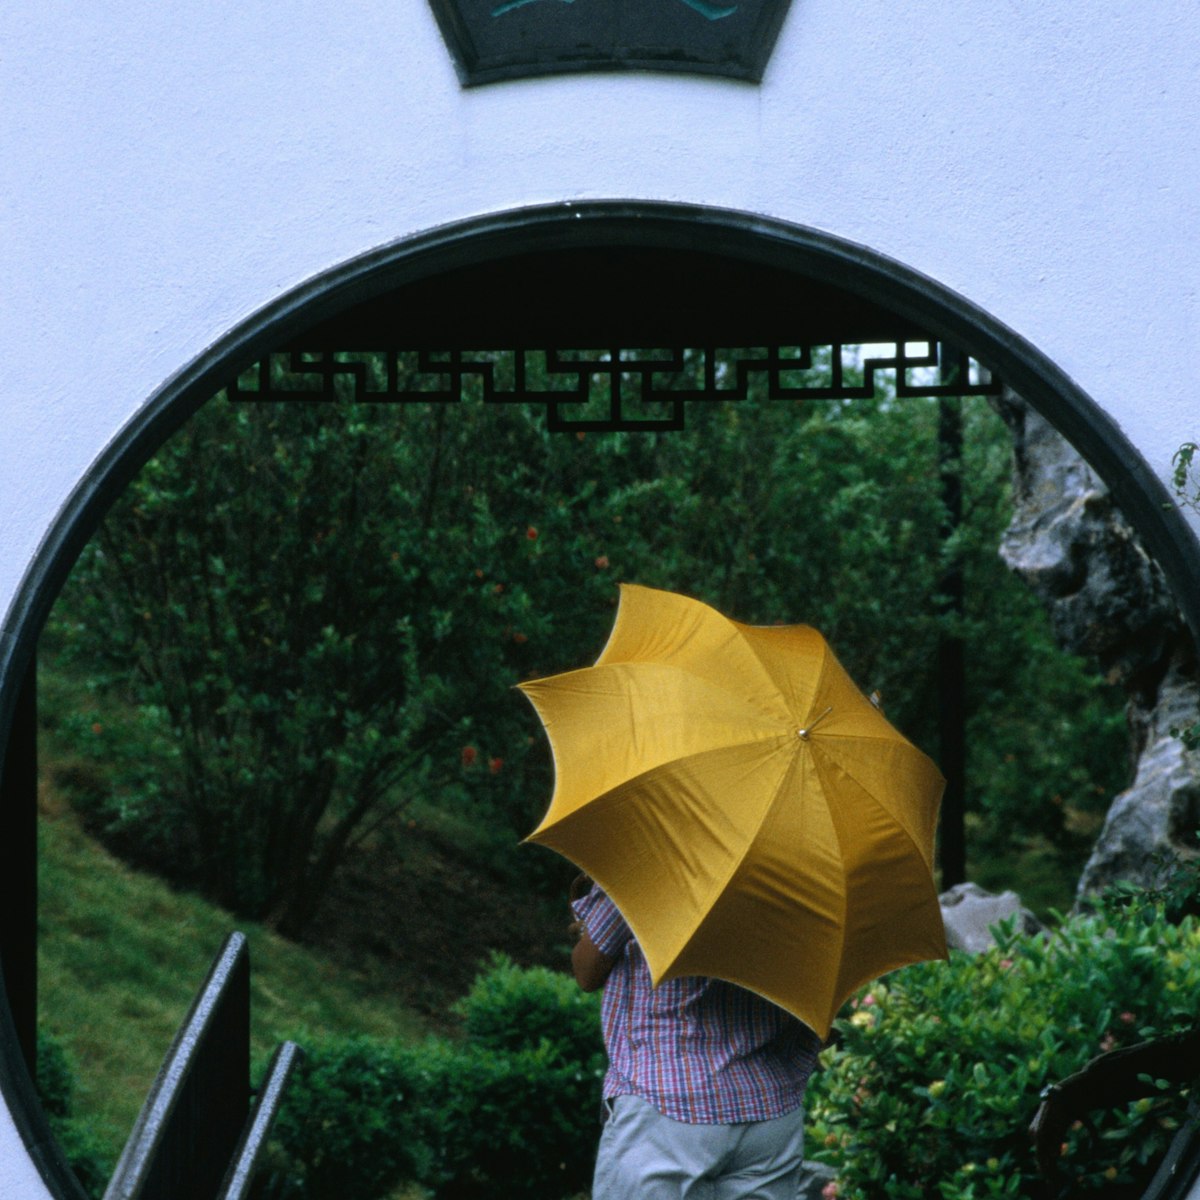 A visitor to the Kowloon walled city park walks through the Moon Gate.